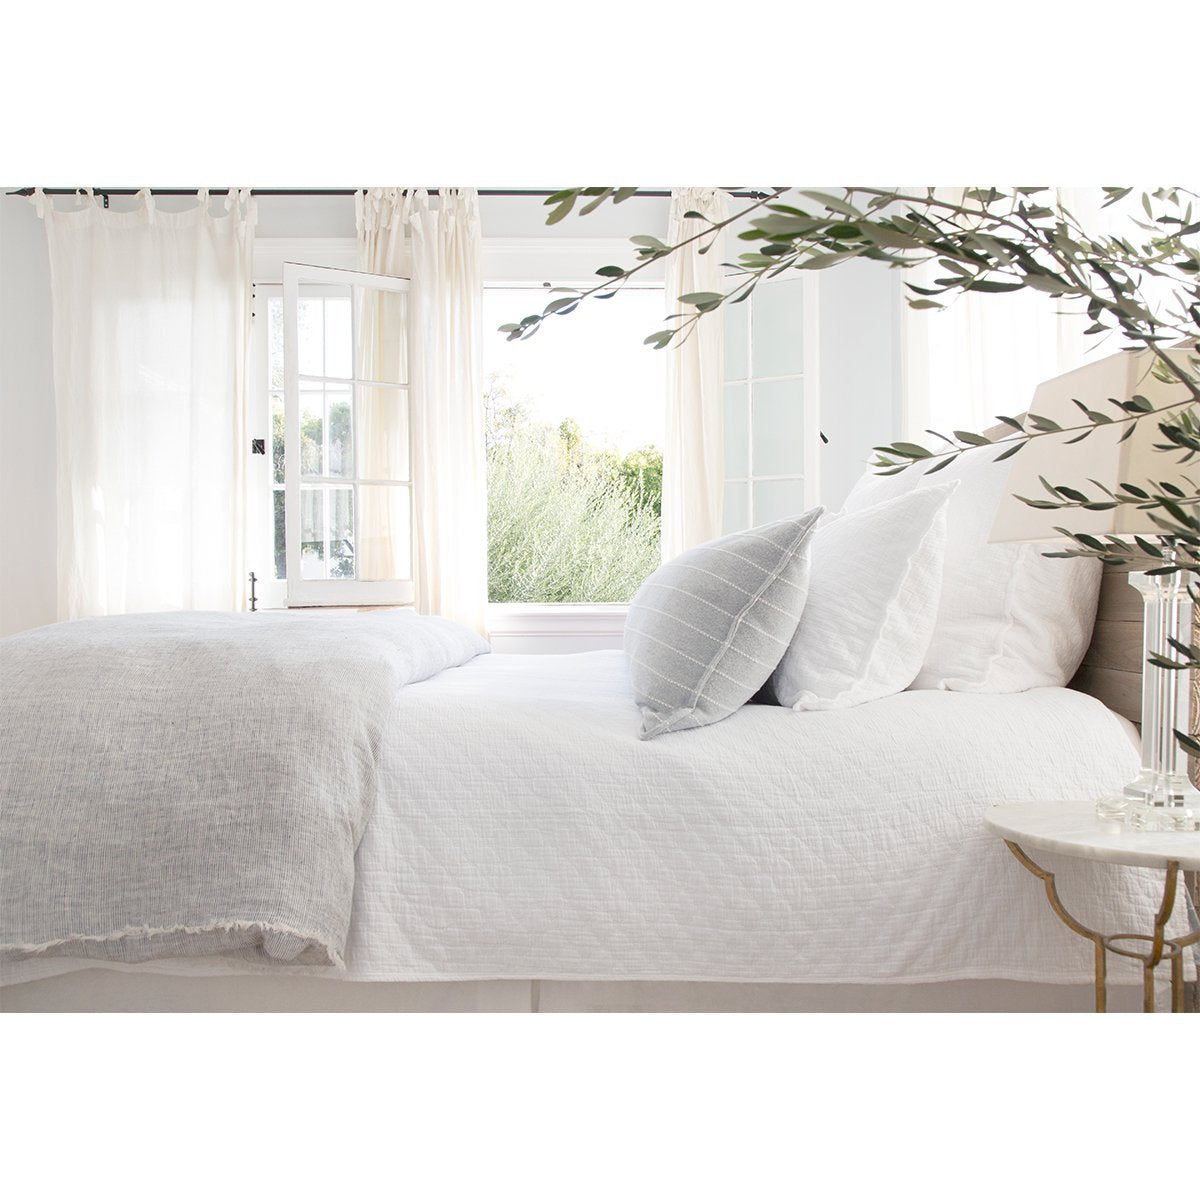 Crafted in Portugal, the Ojai matelasse by Pom Pom at Home is light and casual, bringing comfort with its subtle diamond pattern. The coziest bedding to climb into after a long day.   100% cotton. Machine wash cold; tumble dry low; warm iron as needed. Do not bleach 